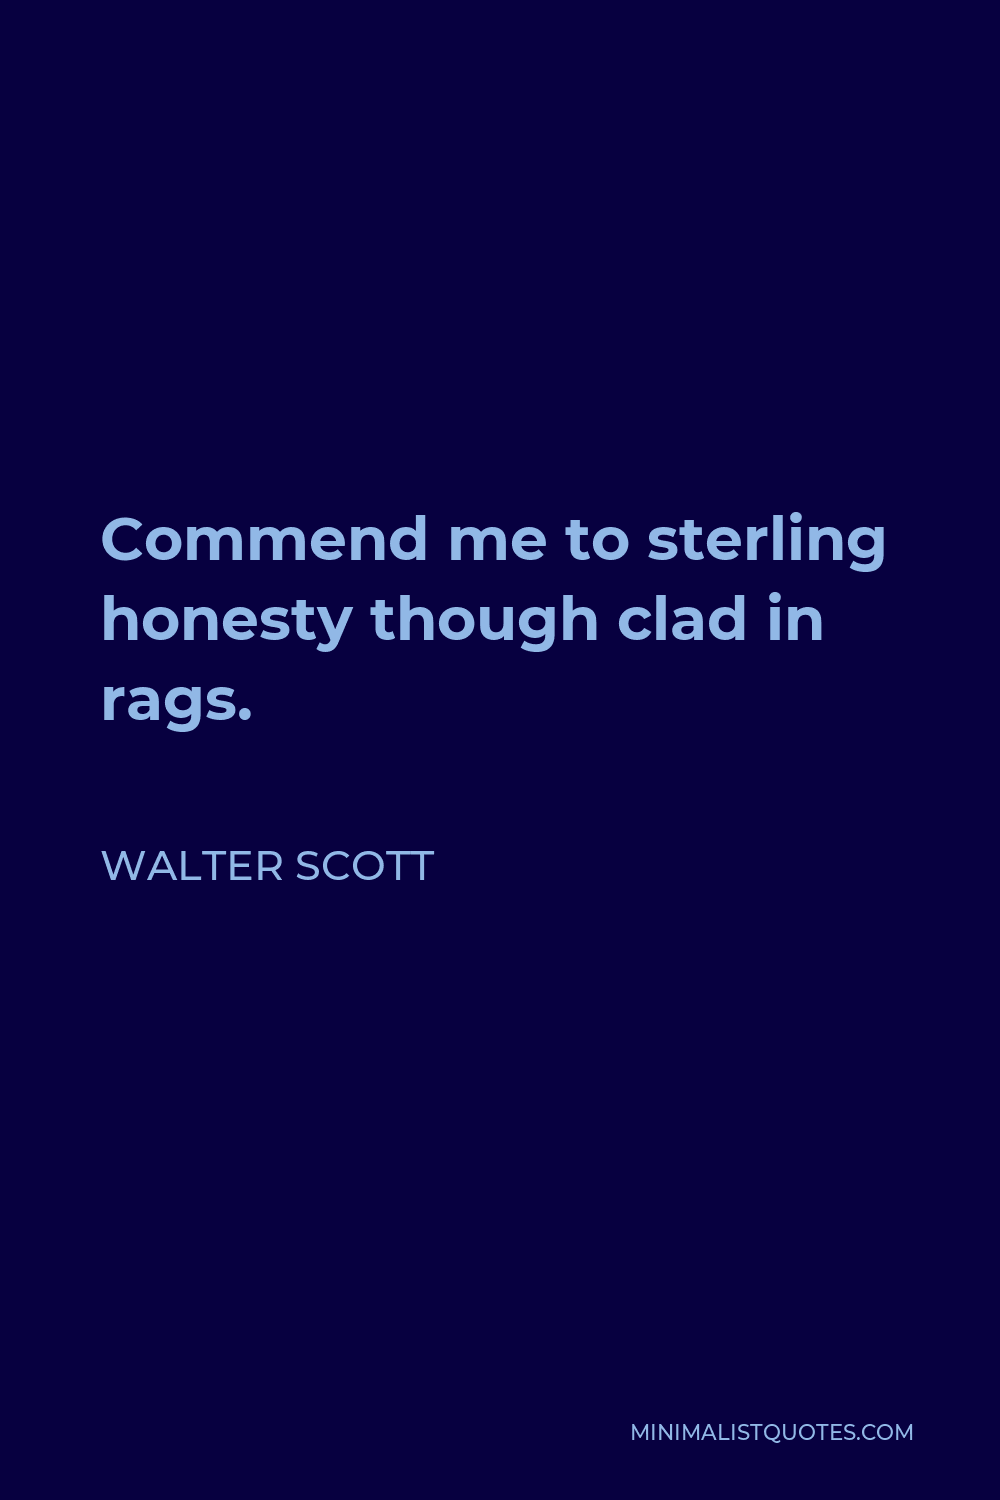 Walter Scott Quote - Commend me to sterling honesty though clad in rags.